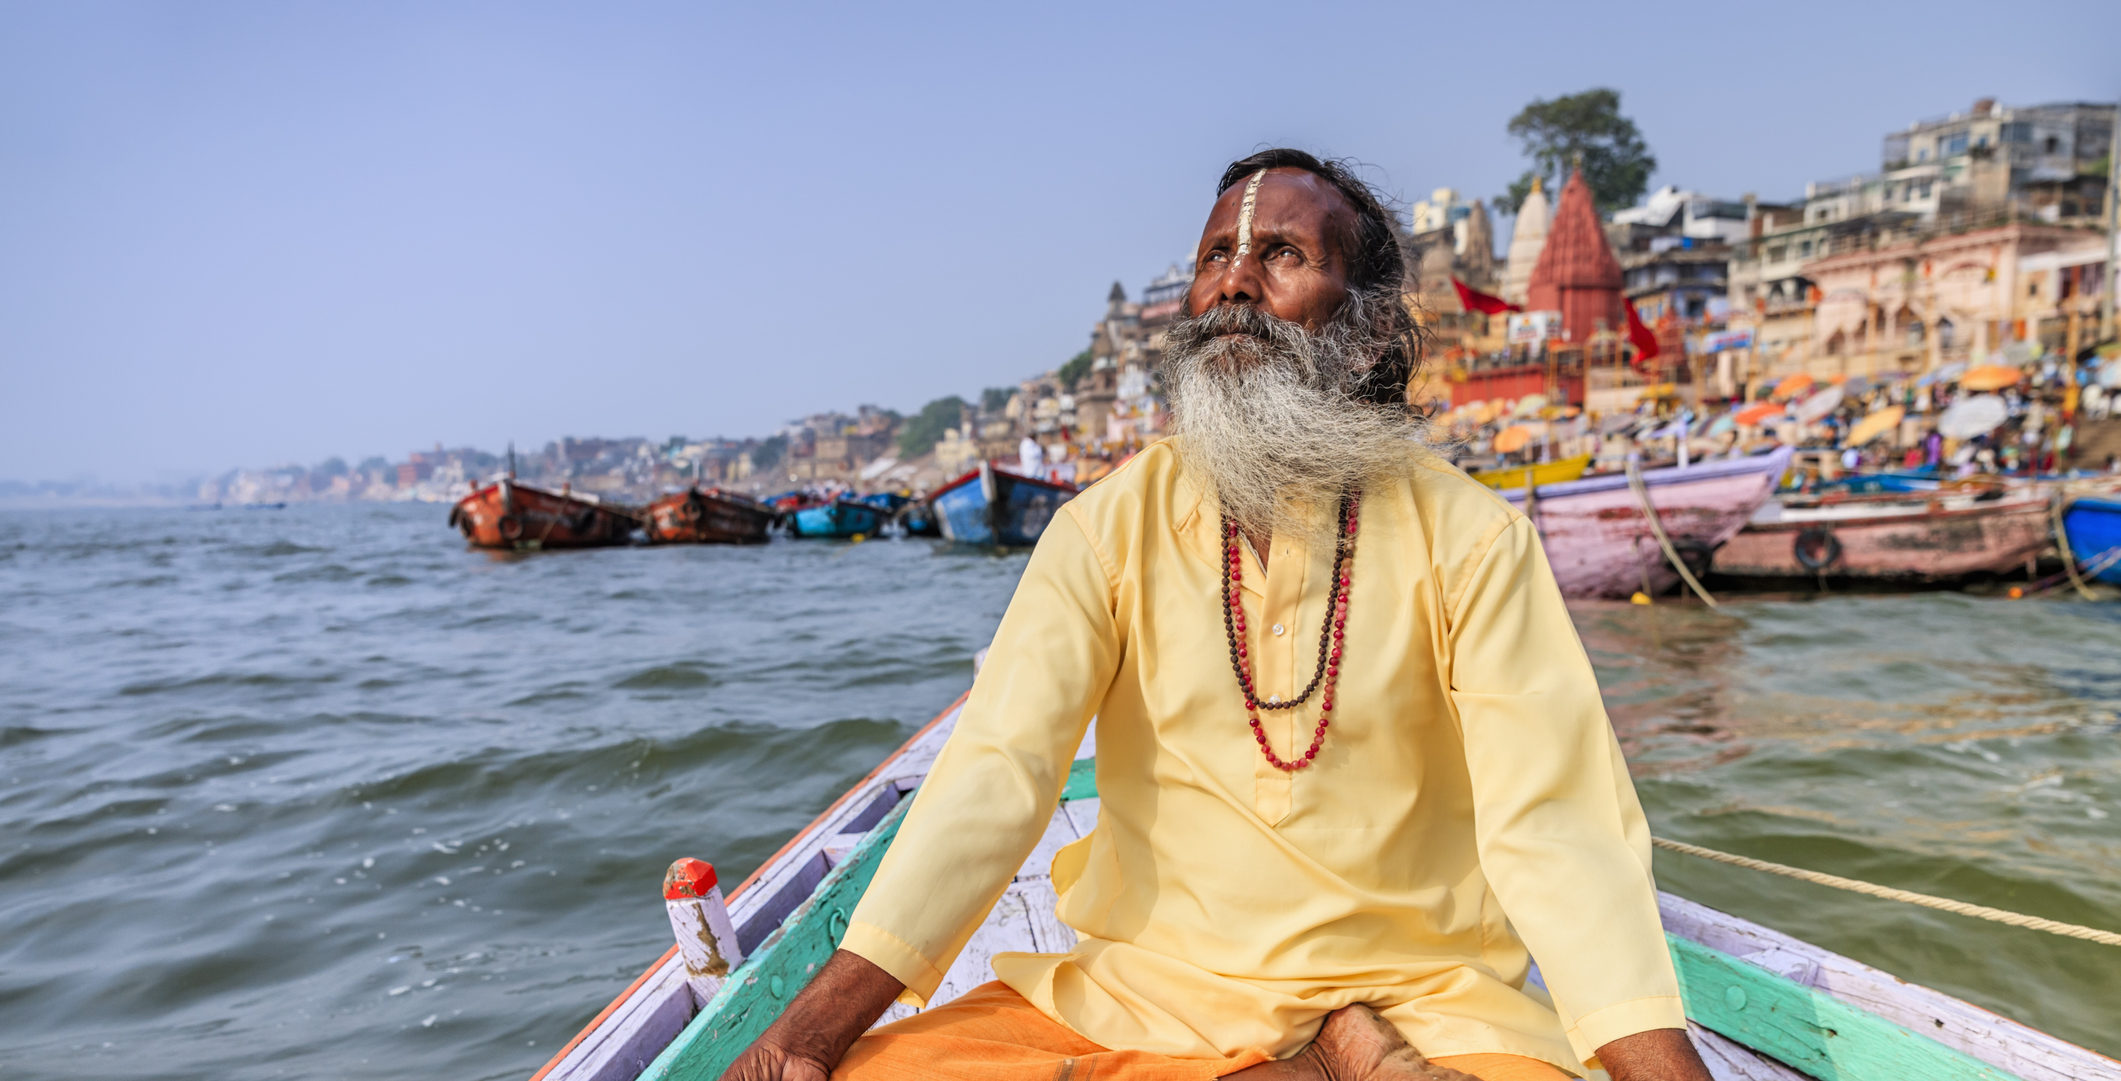 Meet friendly Indian locals like this tour guide meditating in a boat on the Ganges, Varanasi when you take a tailor-made holiday with Alfred&.